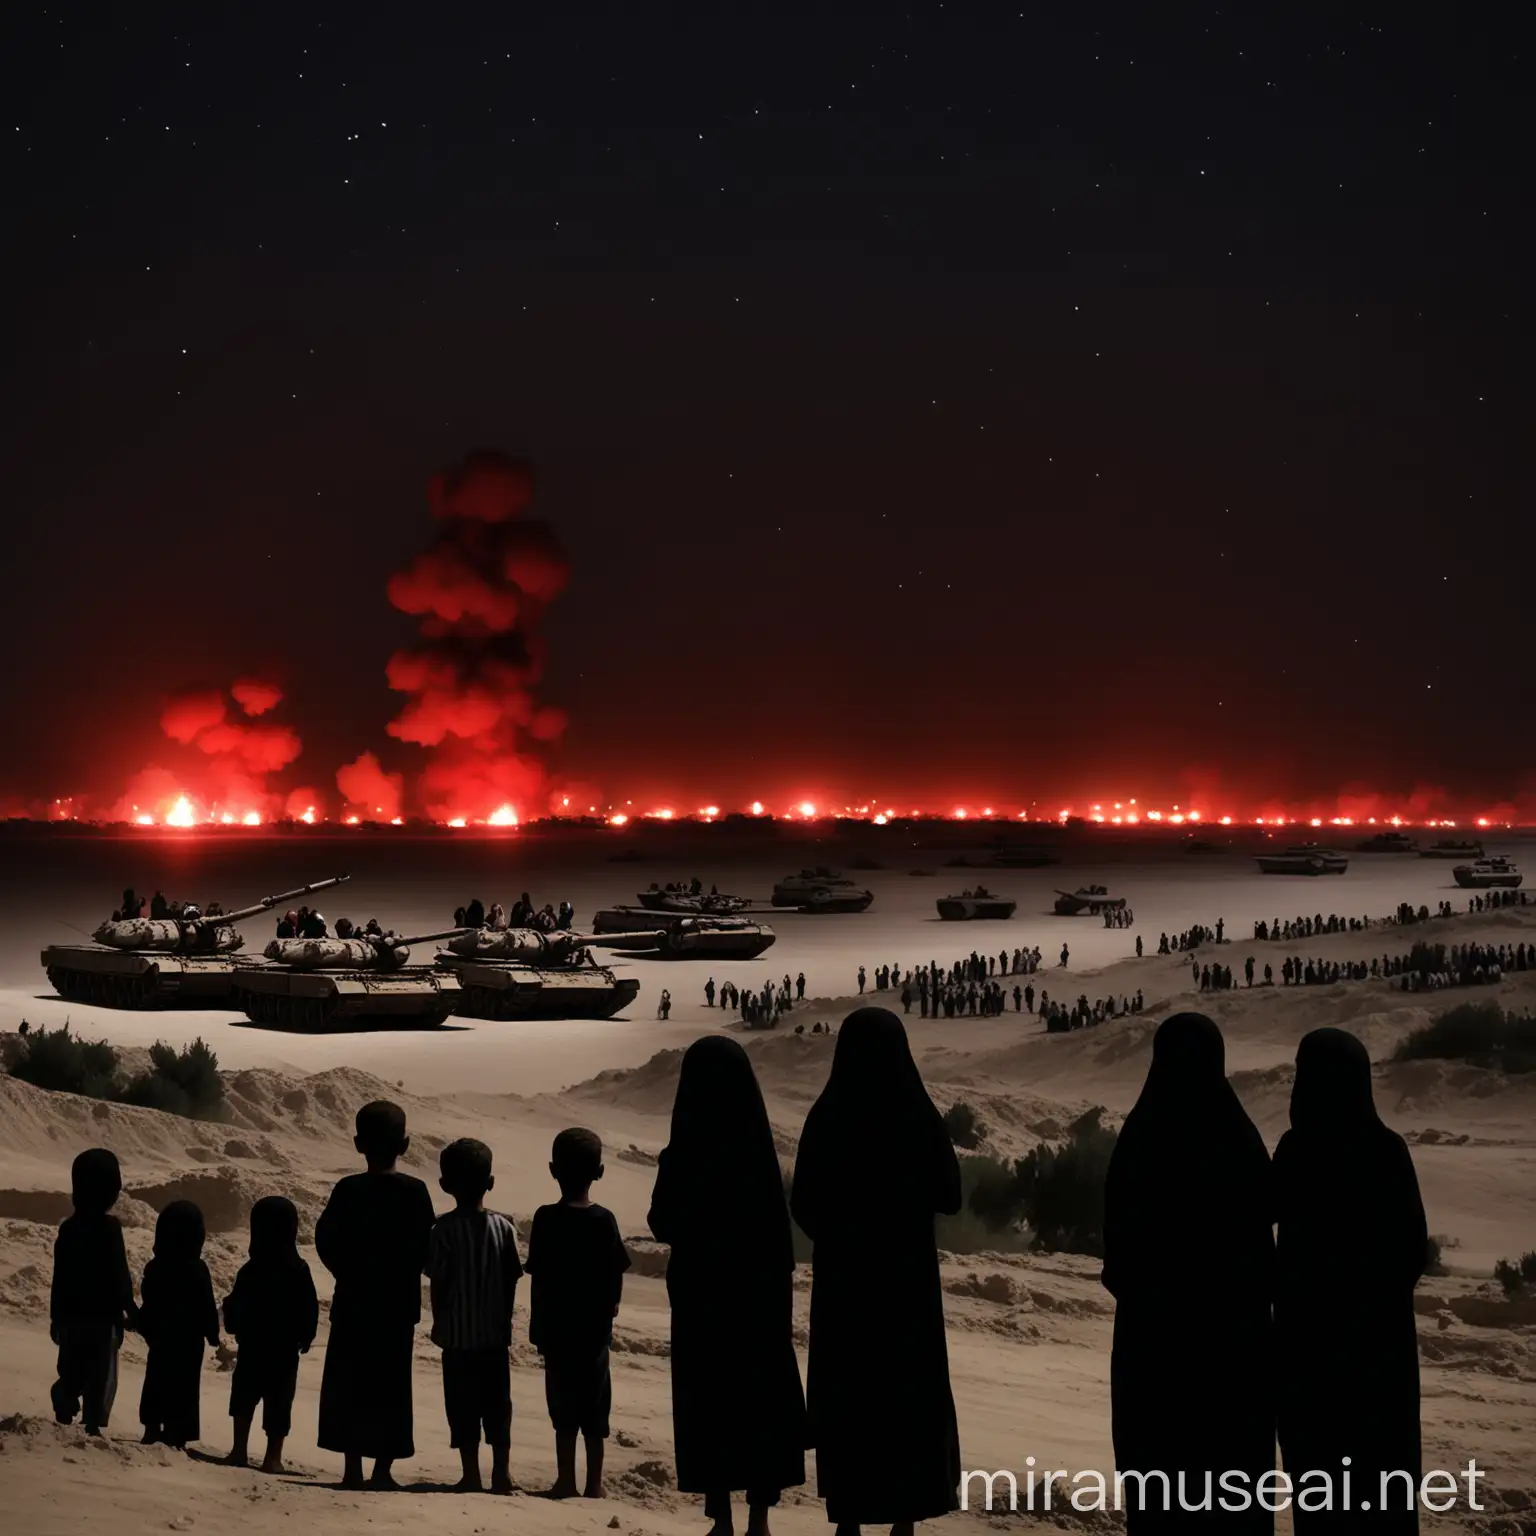 gazans; women children and men watching the tanks approaching from the horizon as the night sky starts to turn blood red